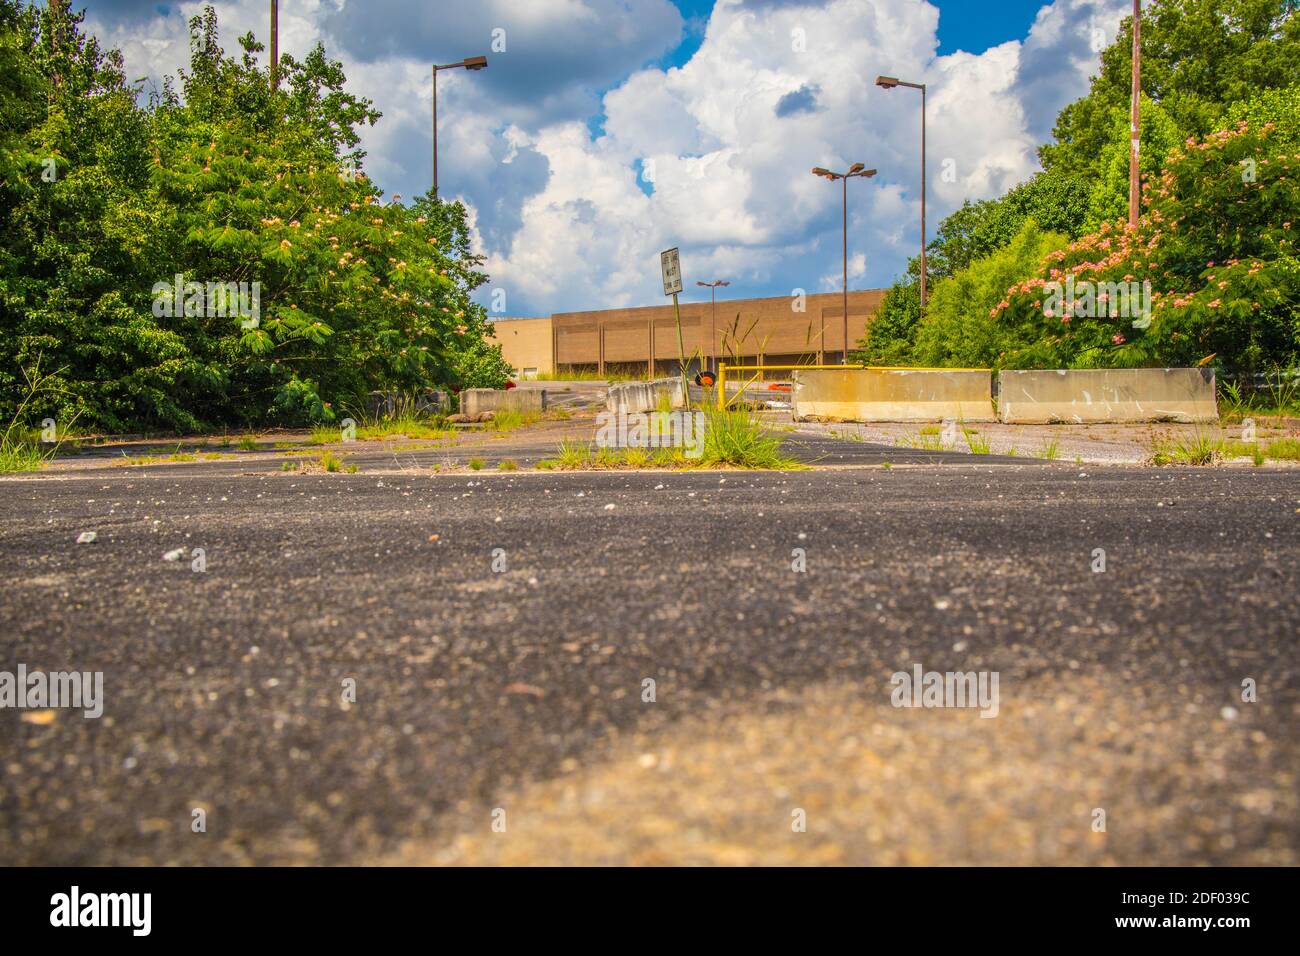 Augusta, Ga USA - 07 04 20: Abandoned Regency shopping Mallentrance blocked off low ground view Stock Photo